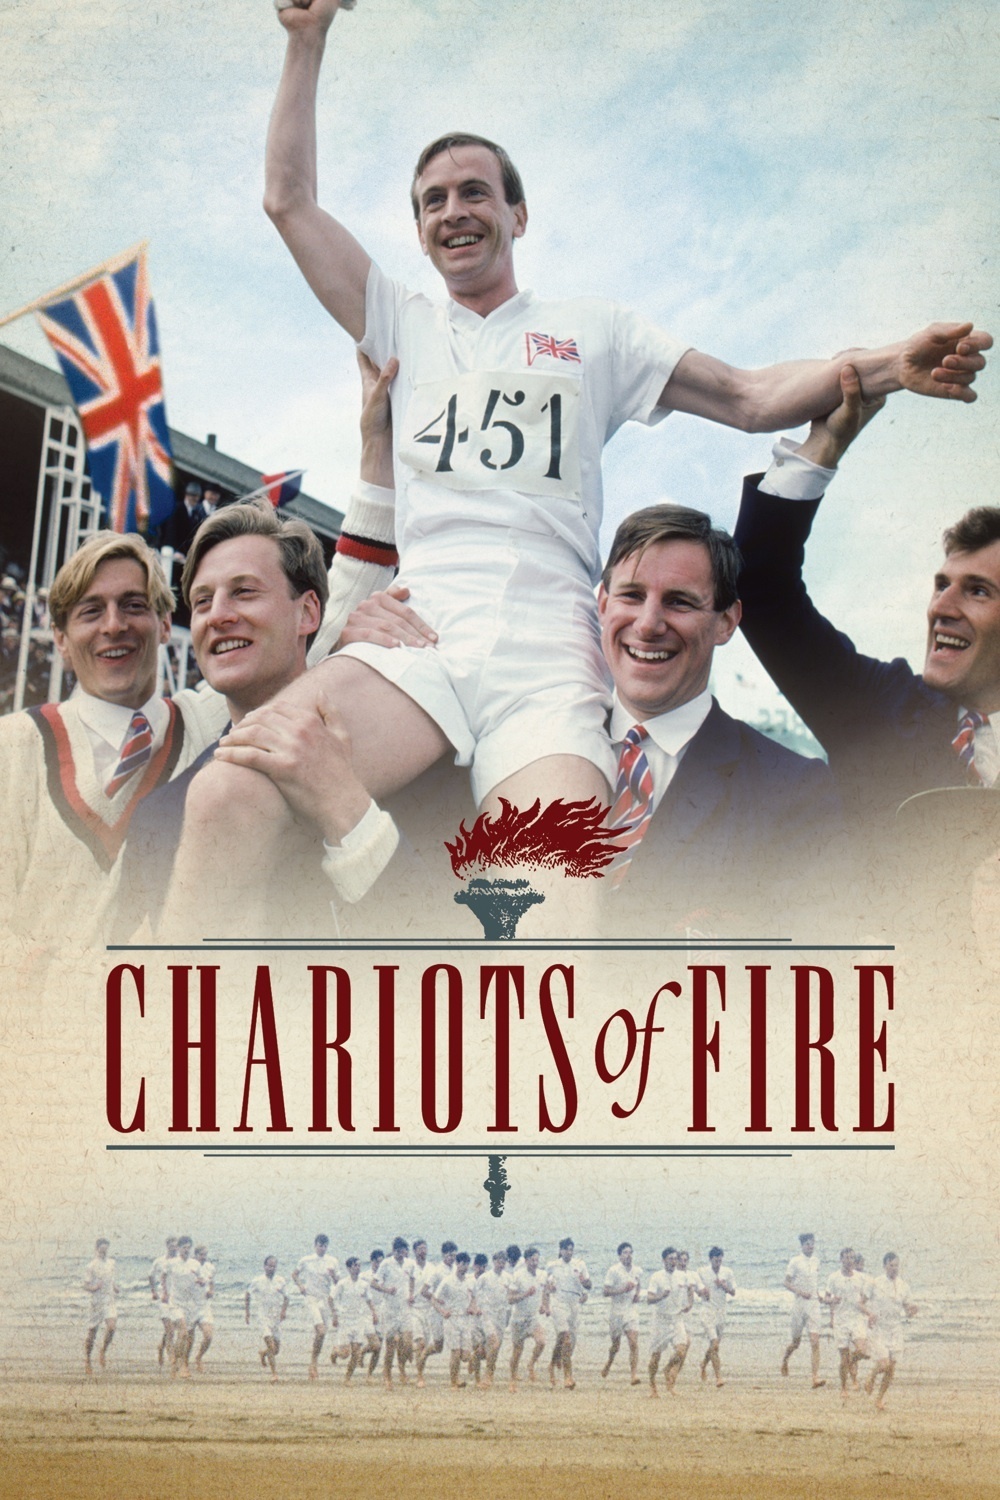 Poster for the movie "Chariots of Fire"